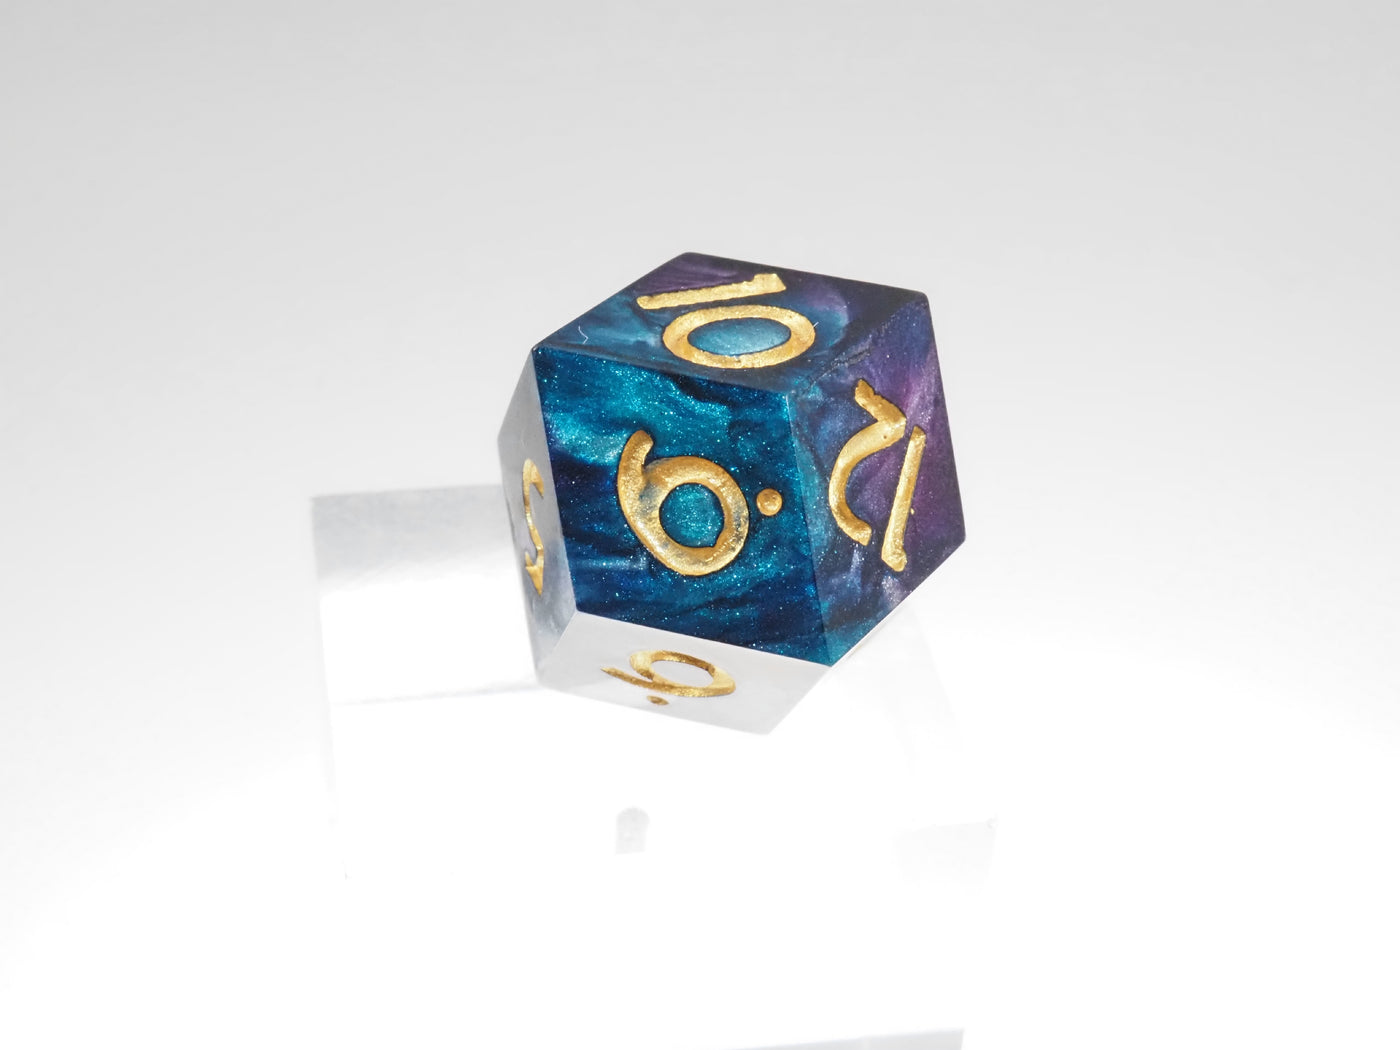 Drip Dice Turquoise and Violet